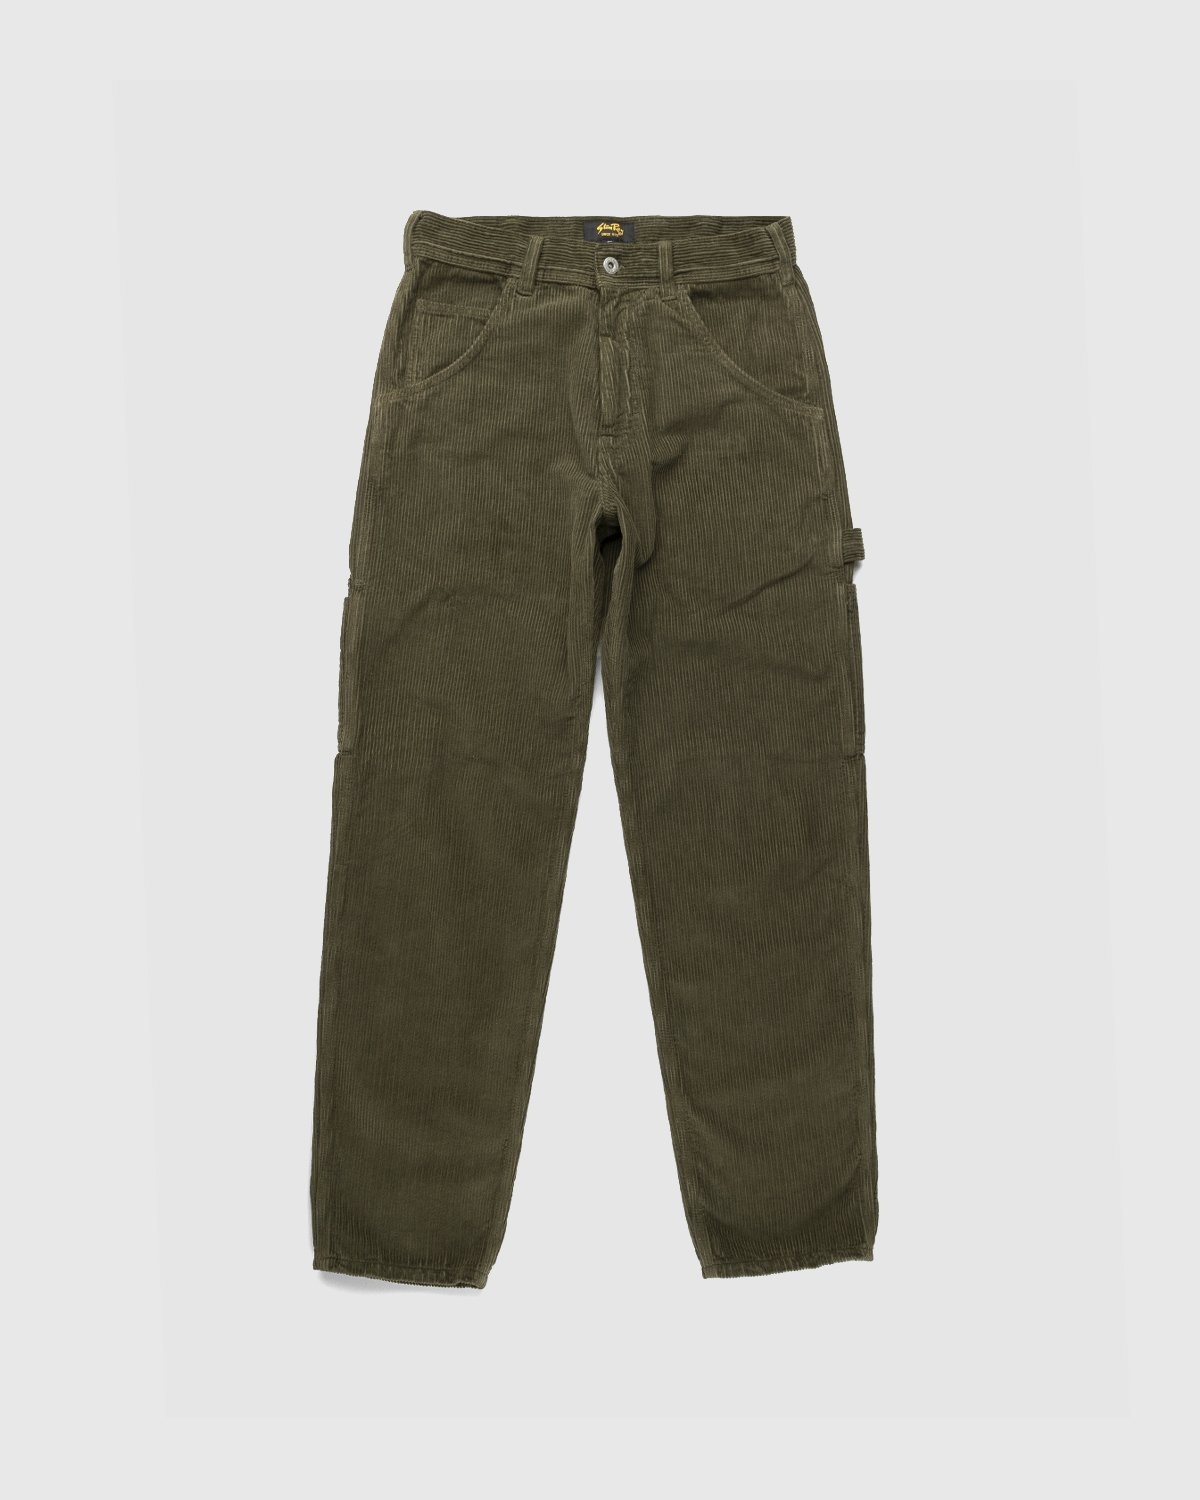 Stan Ray – 80s Painter Pant Olive Cord - Pants - Green - Image 1